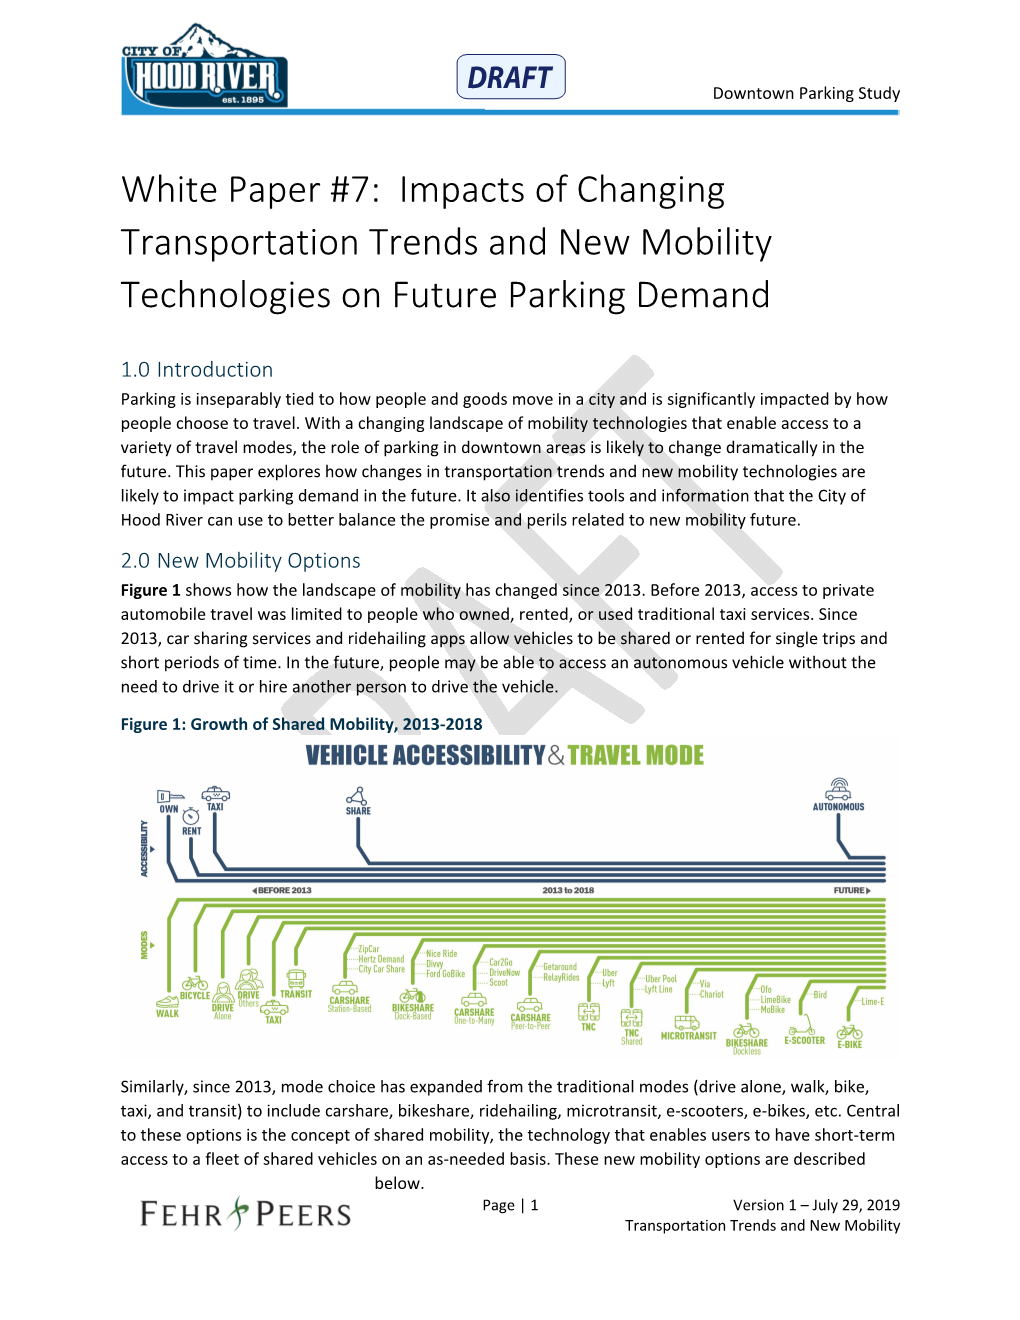 Impacts of Changing Transportation Trends and New Mobility Technologies on Future Parking Demand